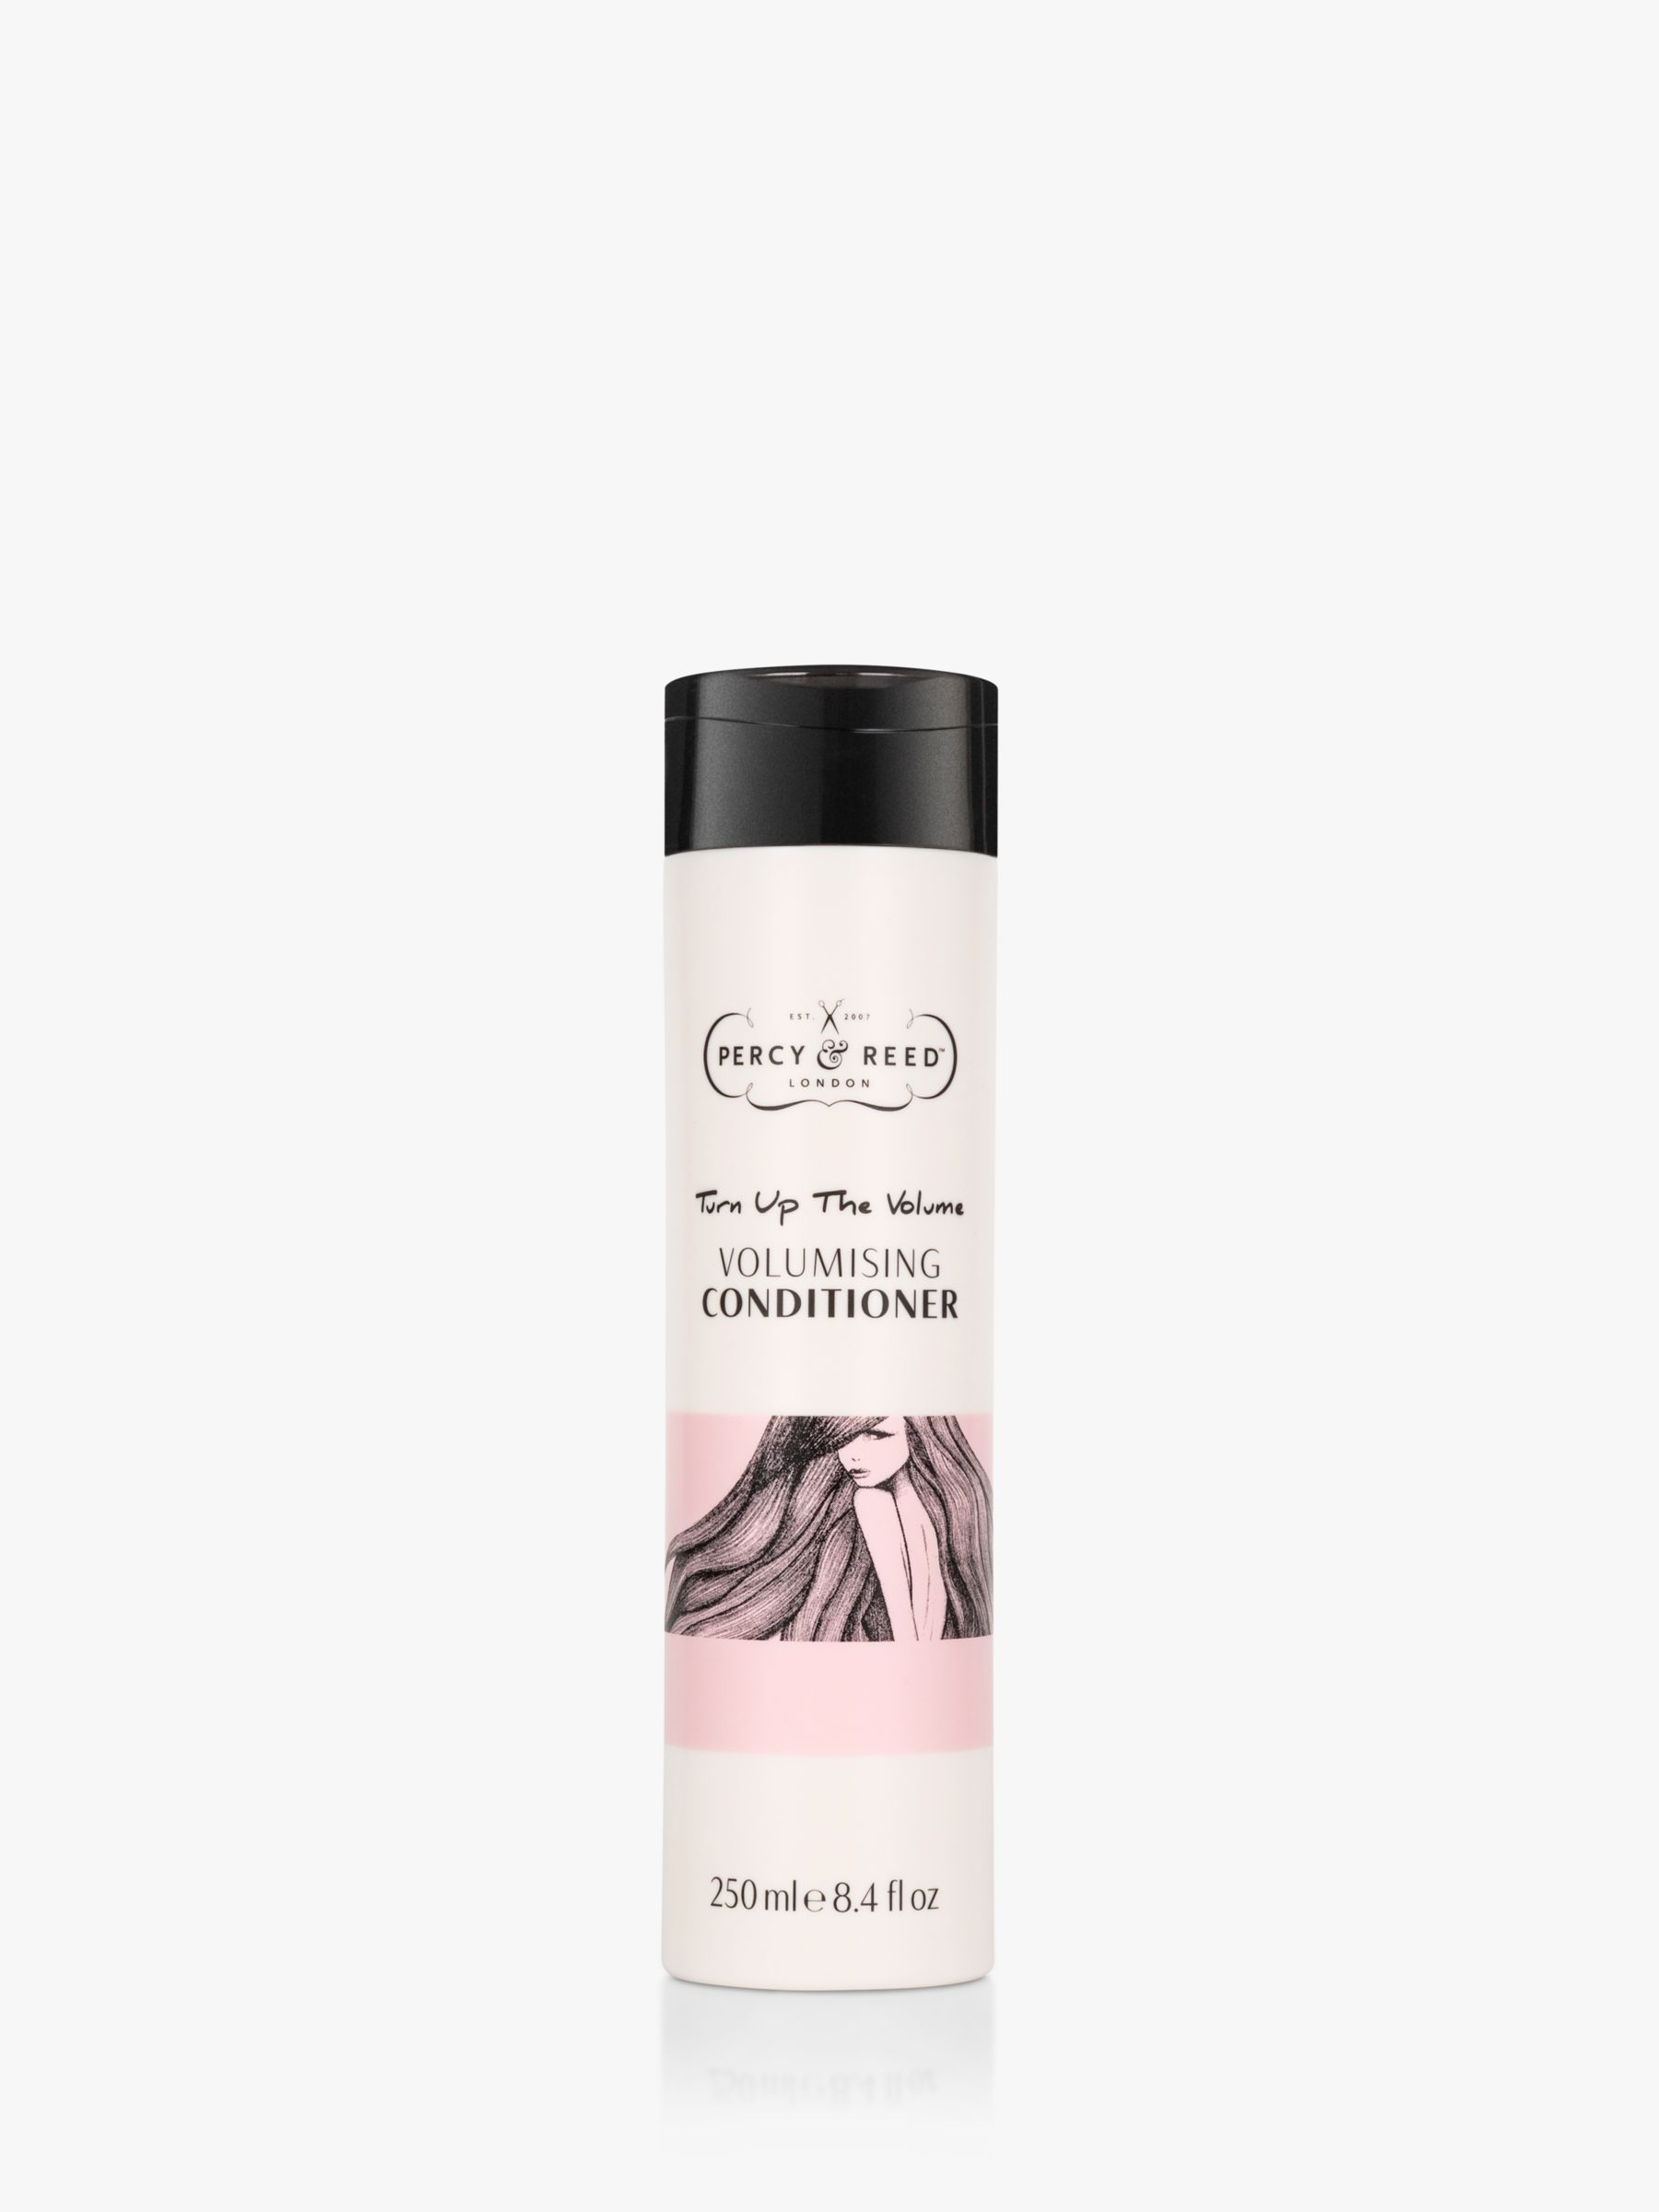 Percy & Reed Turn Up The Volume Volumising Conditioner, 250ml 1